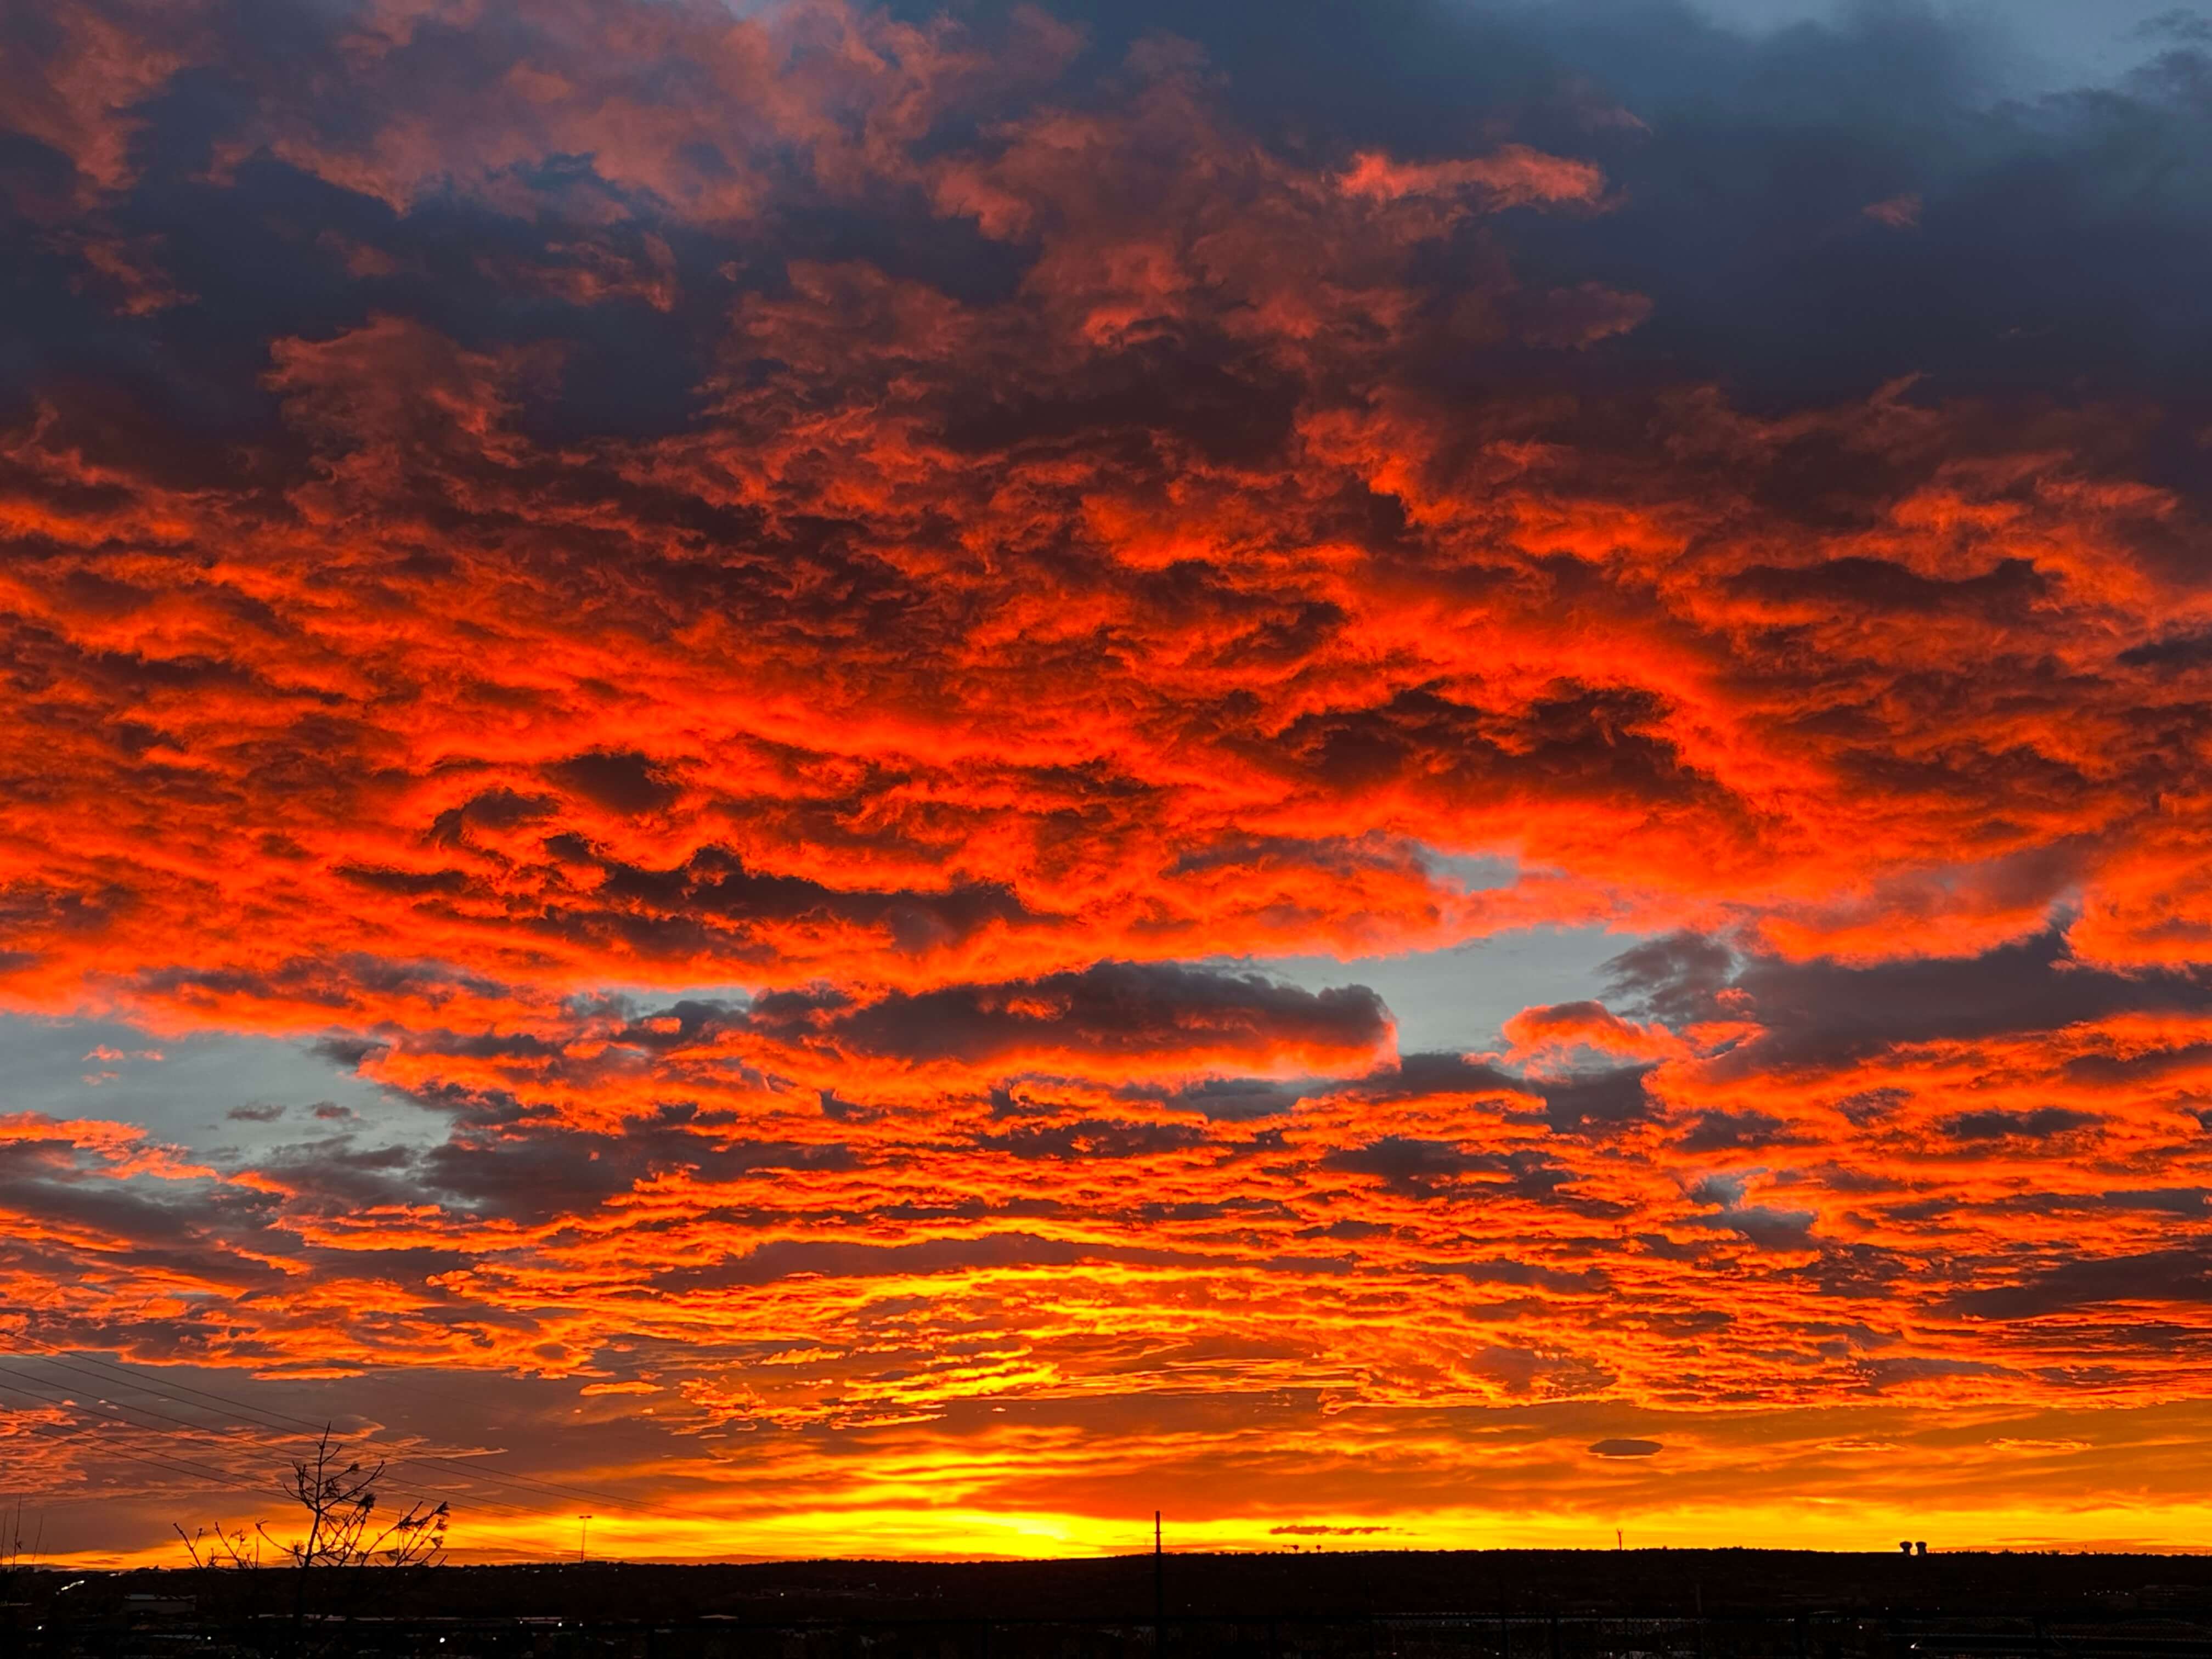 Bright orange sunset with many clouds and horizon